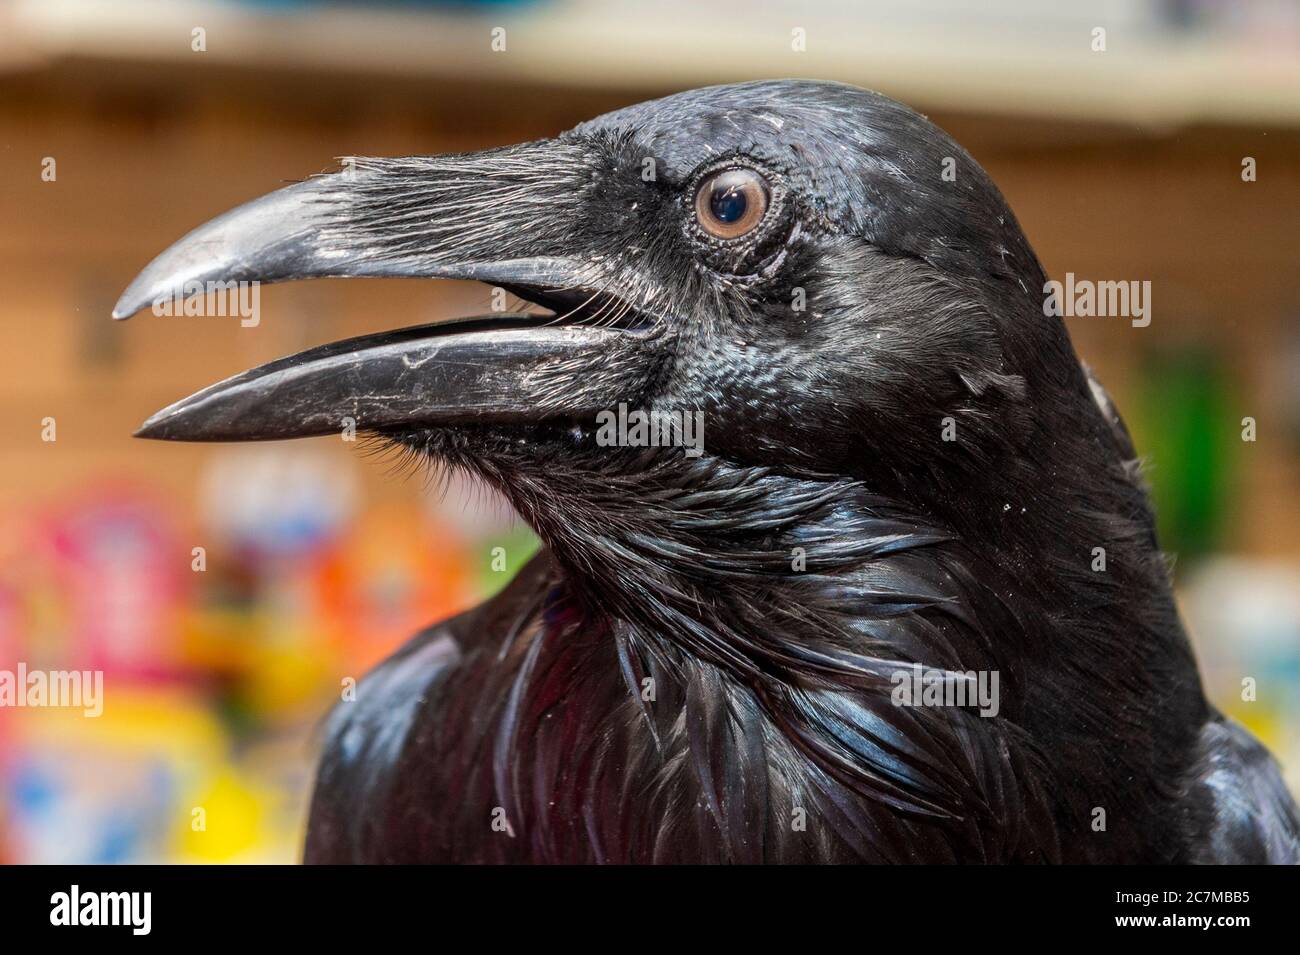 Bantry, West Cork, Ireland. 18th July, 2020. Bantry Pet and Equine Pet Shop, owned and run by Gemma Dale, was host to 2 Ravens this morning. The Ravens have been rehabilitated by Scythe O'Brien of Ravenstone Rehab Centre after they were sent to her by Bantry based vet, Fachtna Collins. Because of their on-going health issues, the birds cannot be released into the wild and therefore stay at the Rehab Centre as long term residents. The centre is not a charity and is funded wholly by Scythe O'Brien. Credit: AG News/Alamy Live News Stock Photo